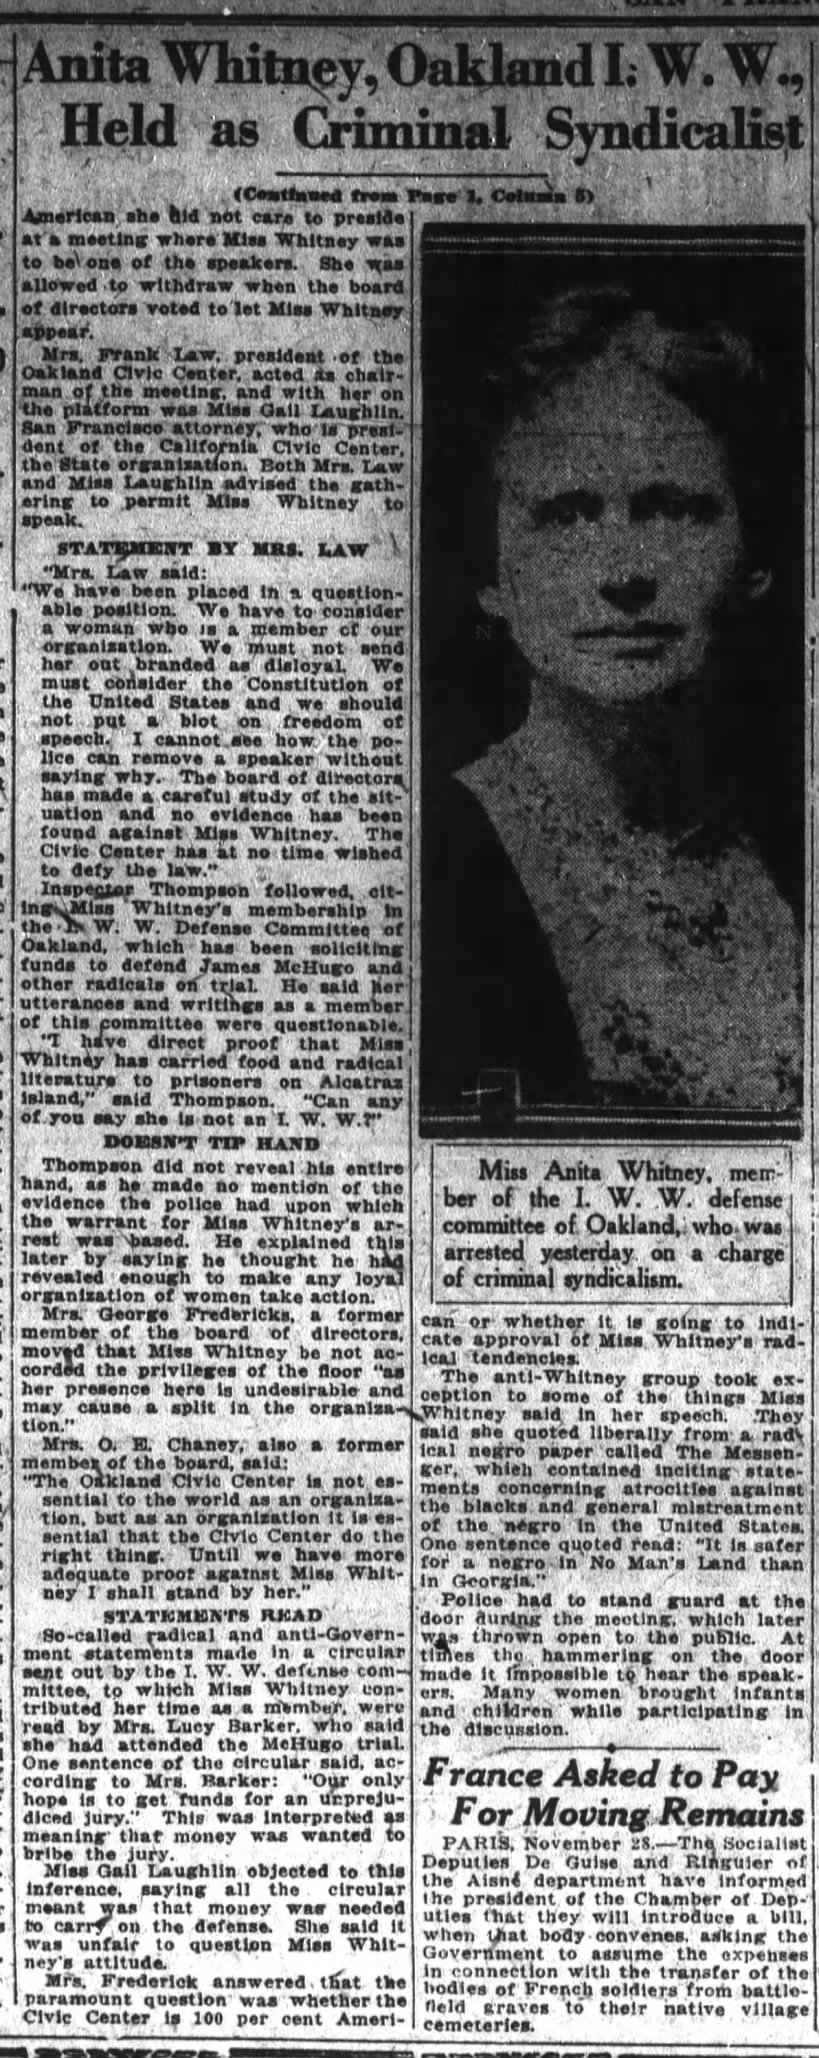 "Anita Whitney, Oakland IWW, Held as Criminal Syndicalist" (jump from front page)